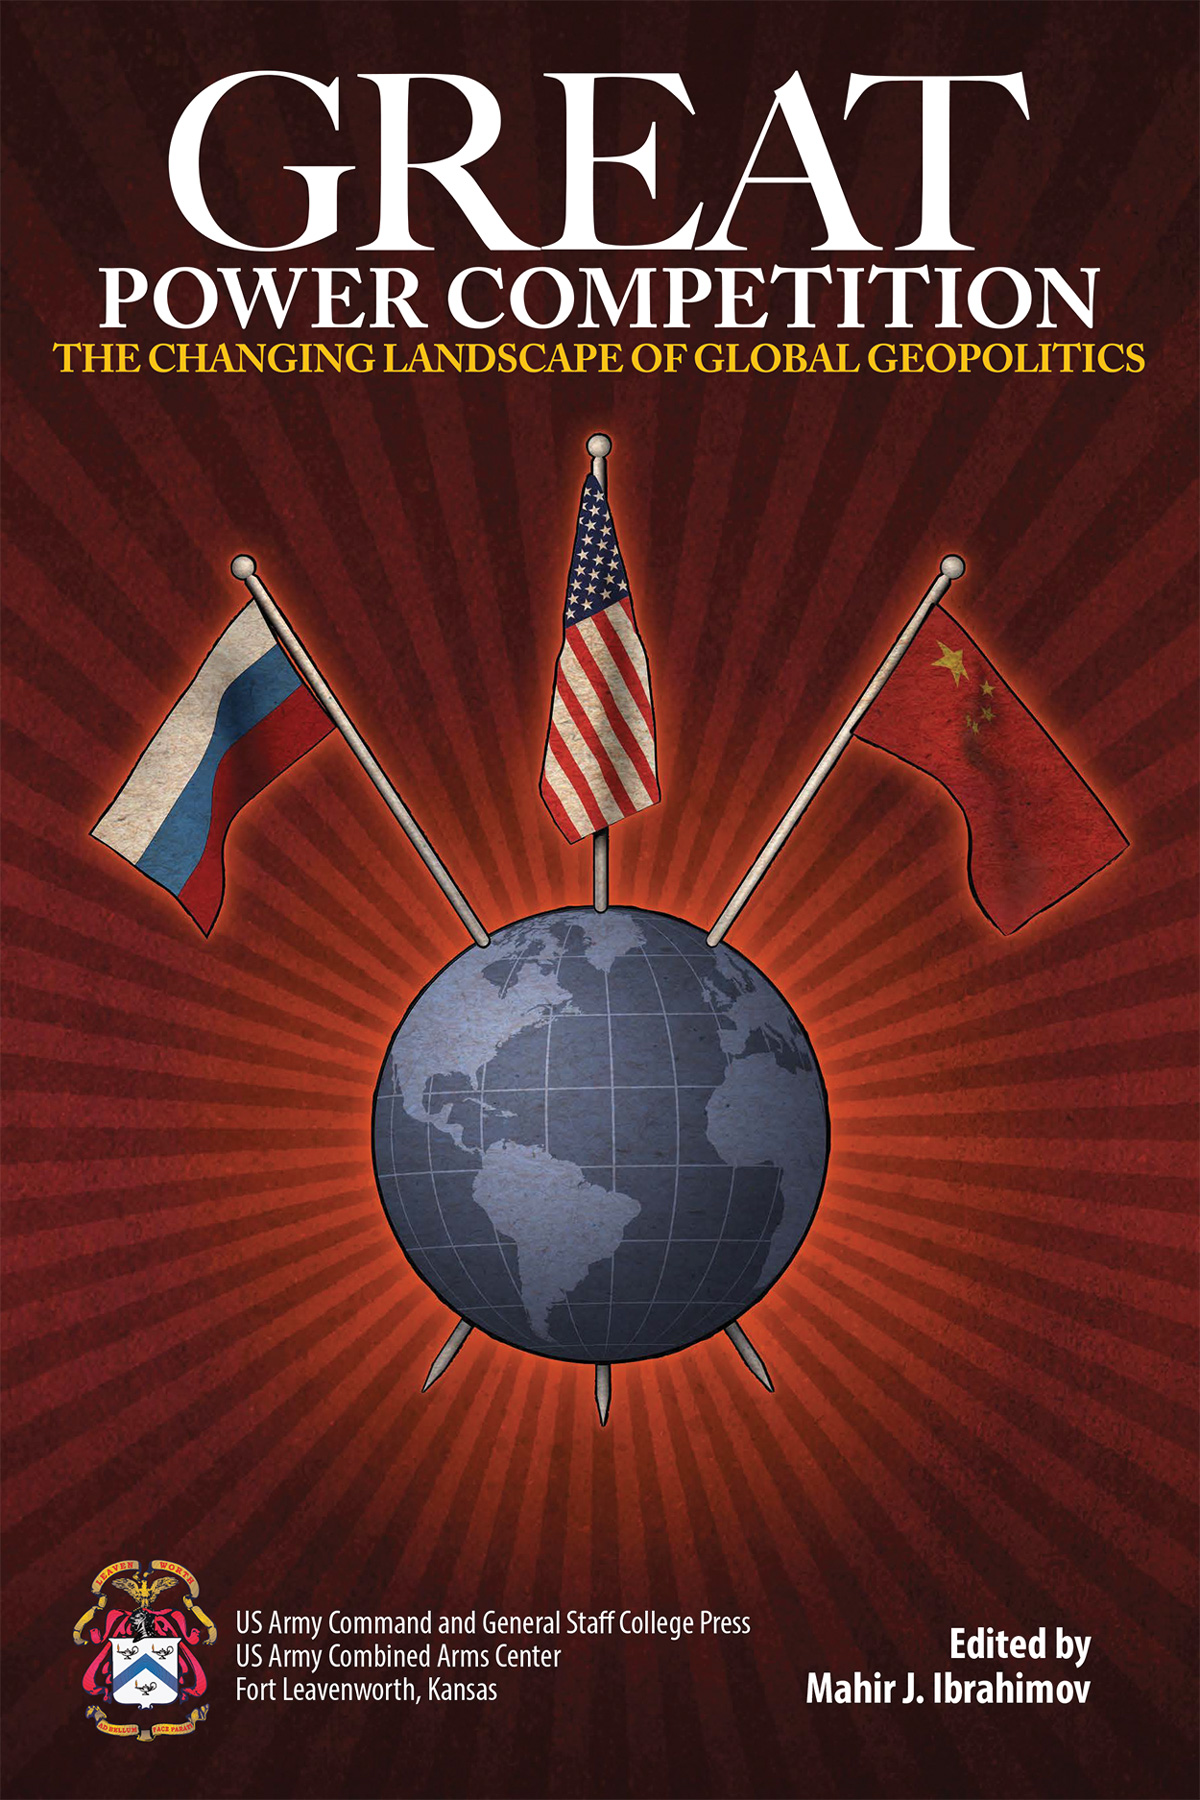 Cover of the Great Power Competition book